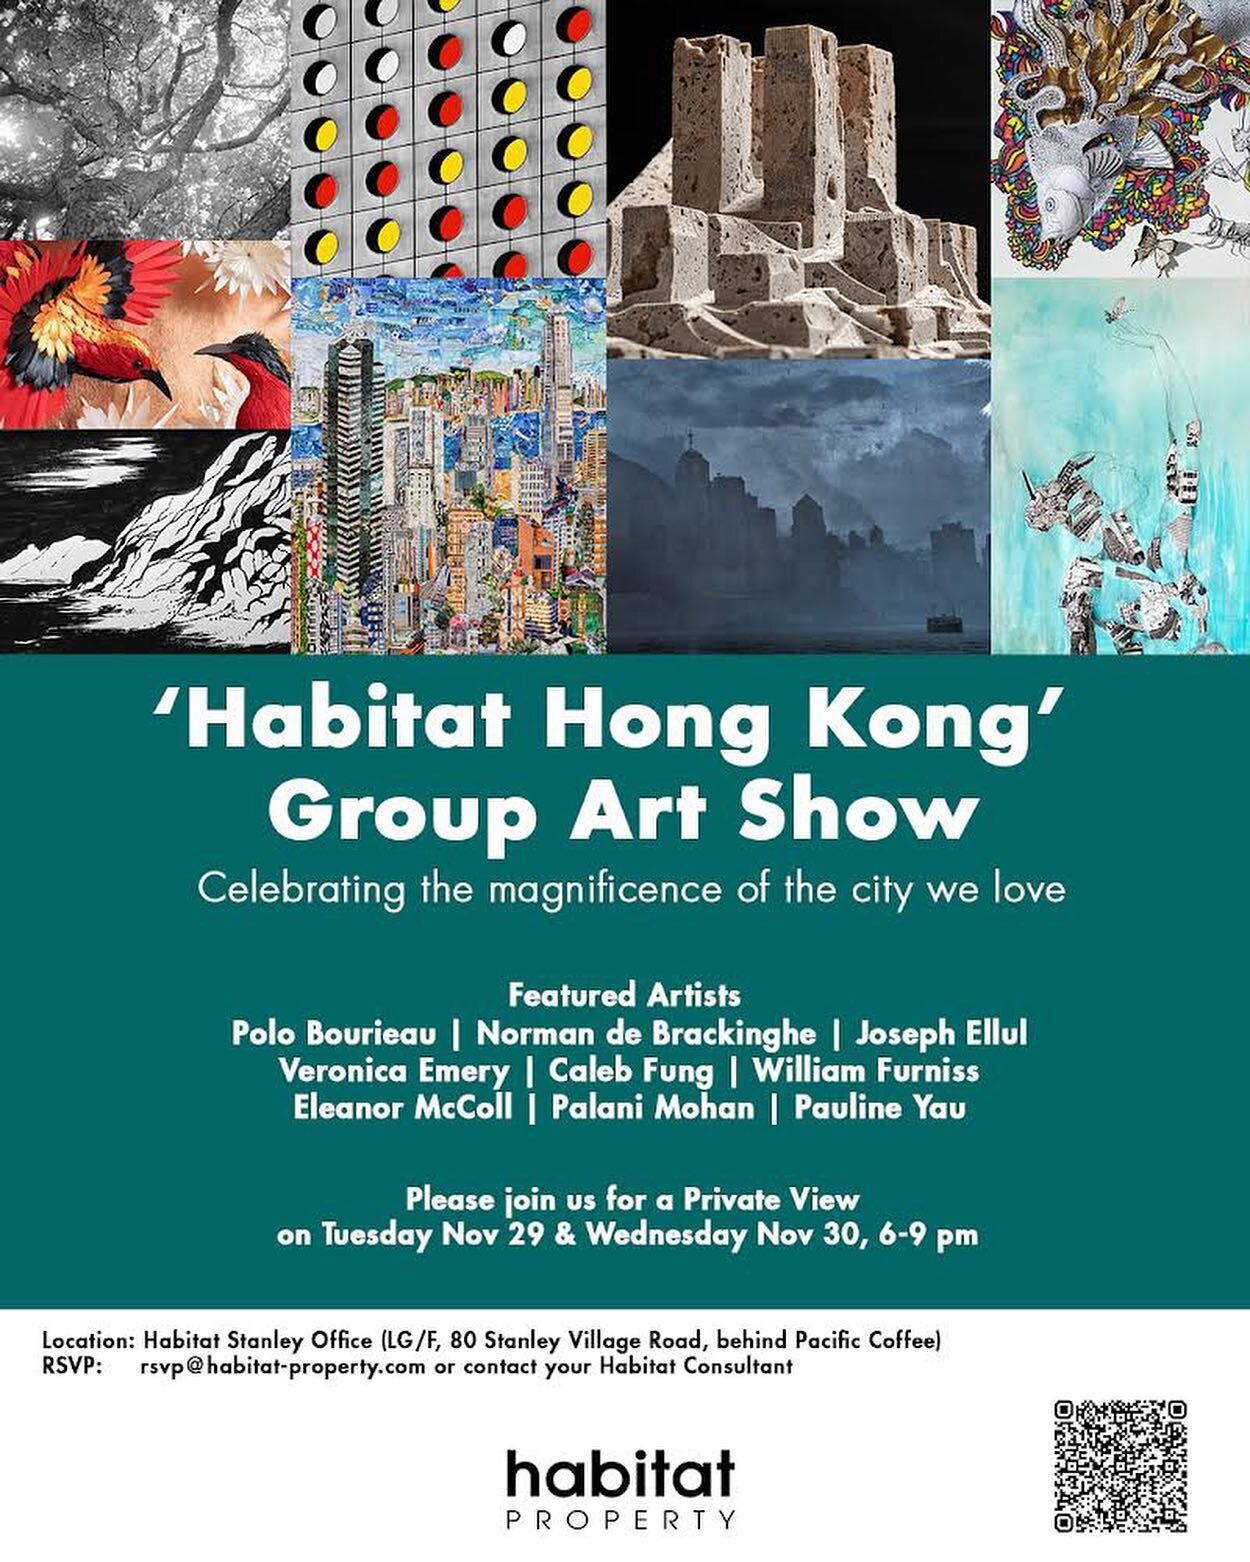 Hello! I'll be taking part in a group exhibition at @habitatproperty , if you're interested in a private viewing, please let me know! RSVP 🙏🏻

Time and venue:
LG/F, 80 Stanley Village Rd, Stanley ( behind Pacific Coffee, Habitat Stanley Office )
Tu